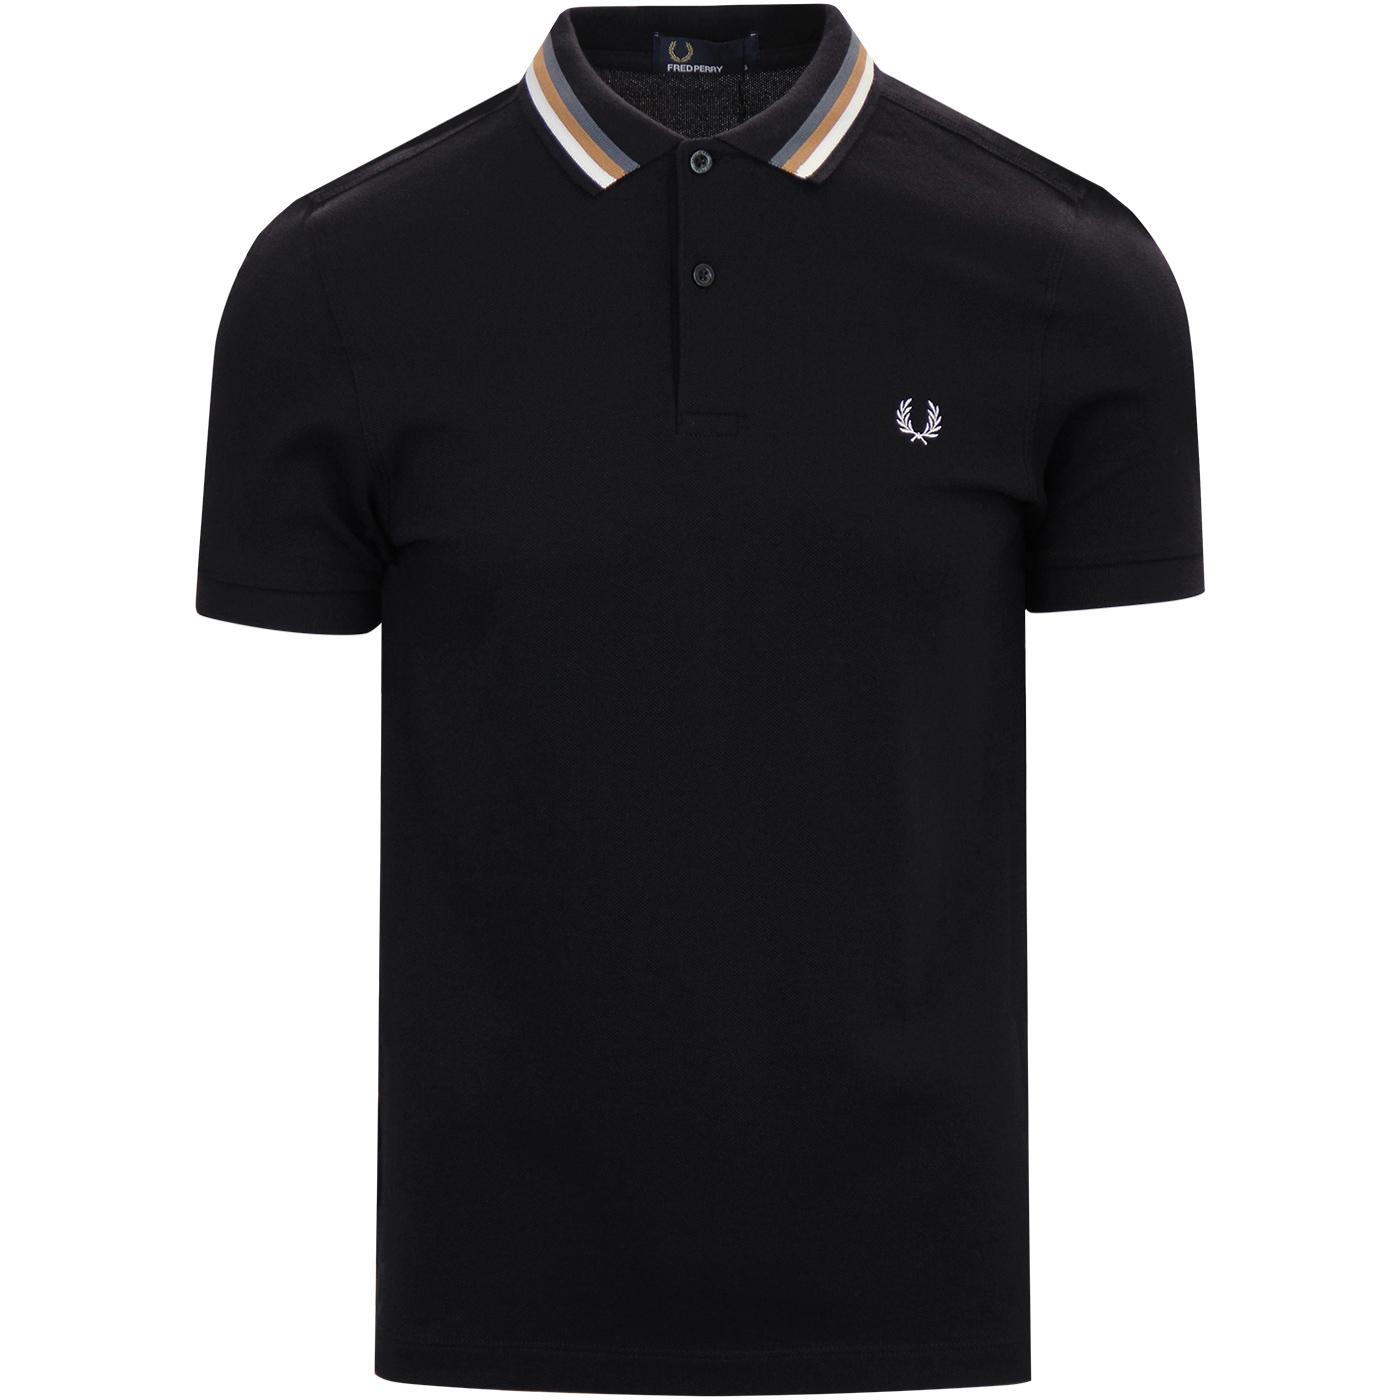 FRED PERRY Bomber Stripe Pique Mod Polo Top BLACK